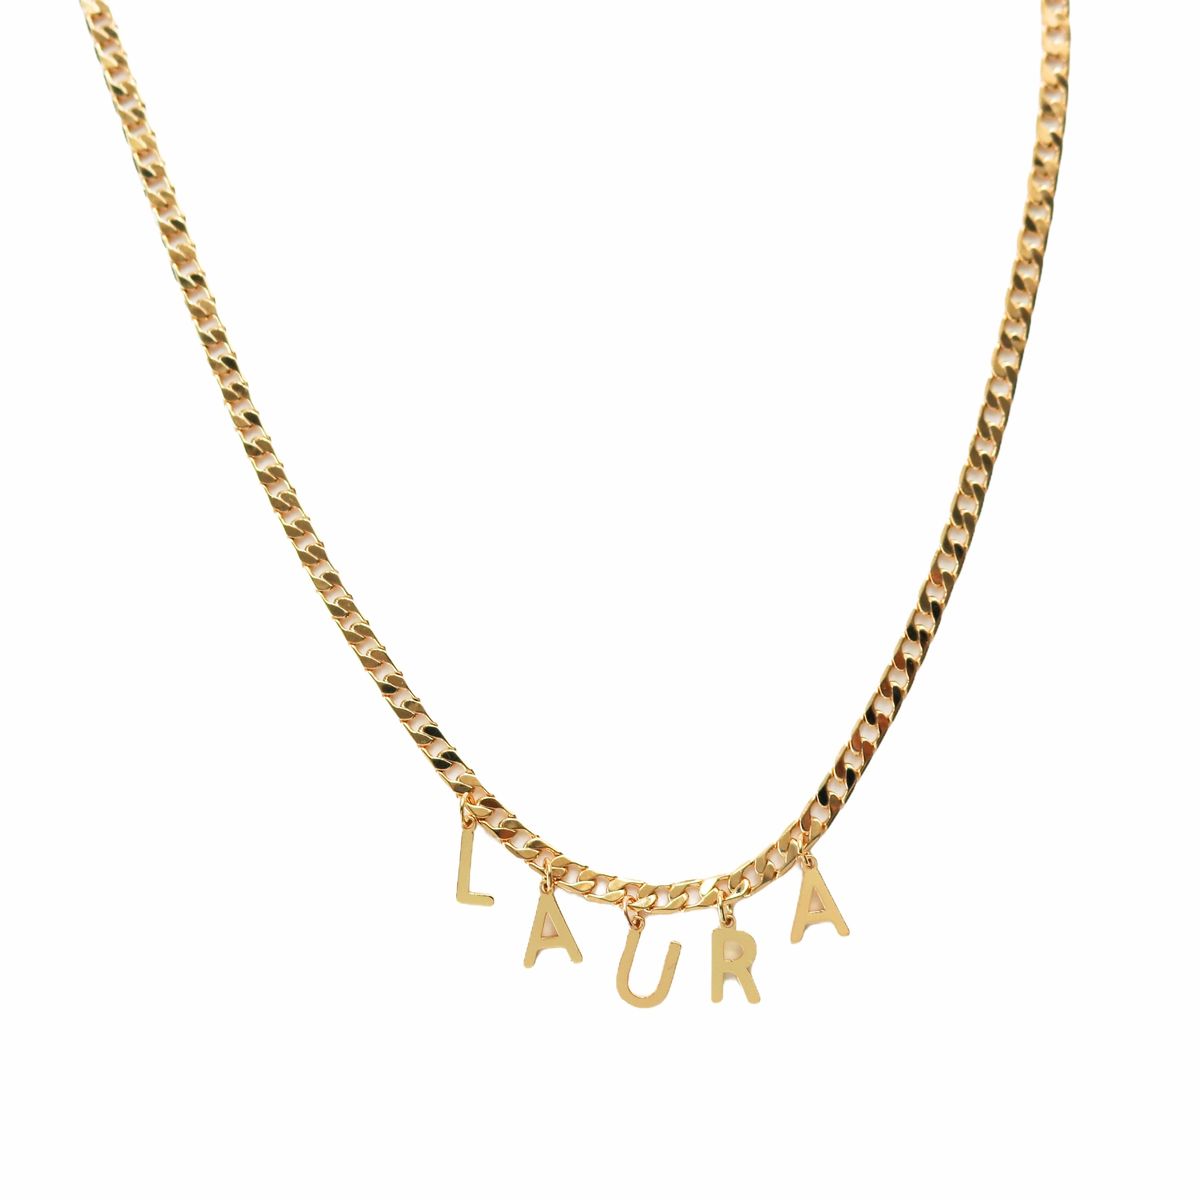 Personalized cuban chain Necklace